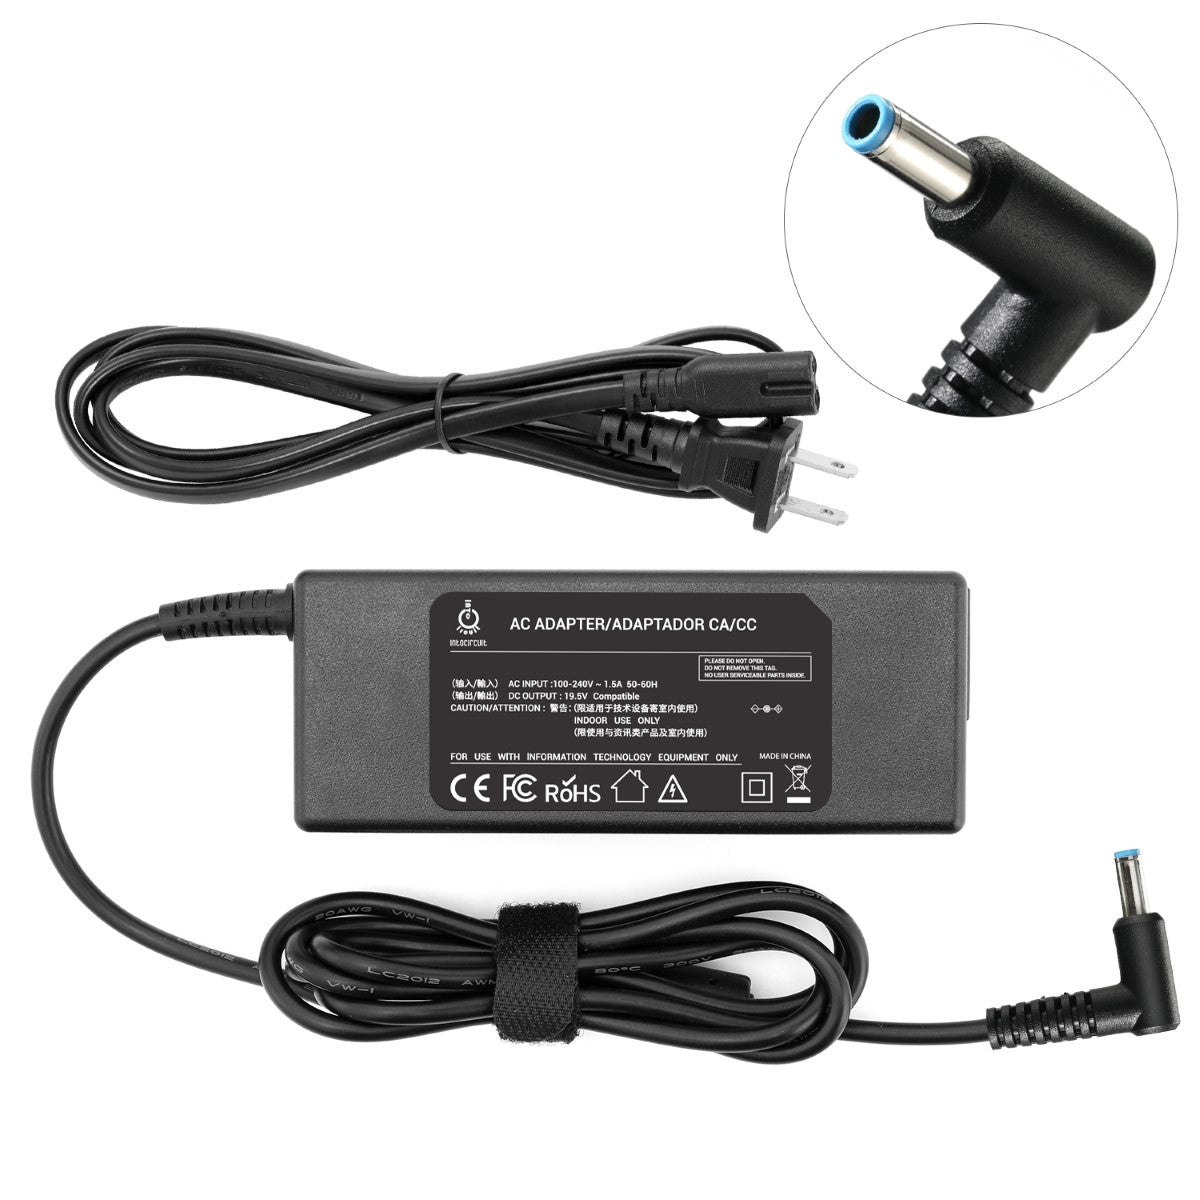 Charger for HP 15-r141ds Touchsmart Laptop